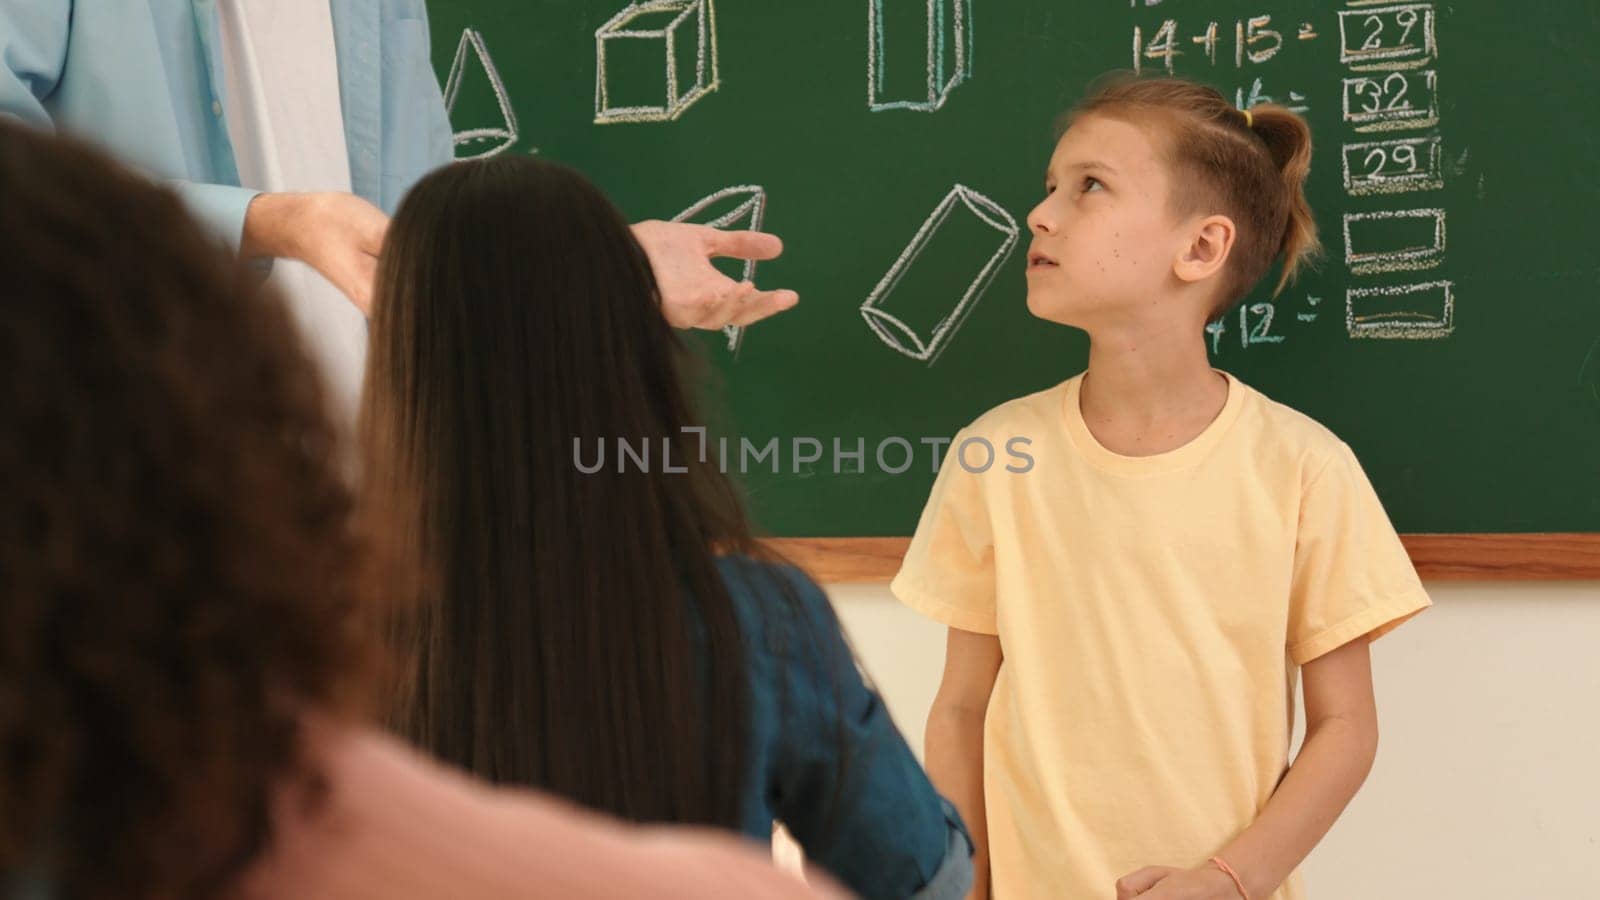 Professional teacher talking and explain idea to asian child during class. Caucasian student listening instructor while standing in front of classroom with blackboard math lesson written. Pedagogy.